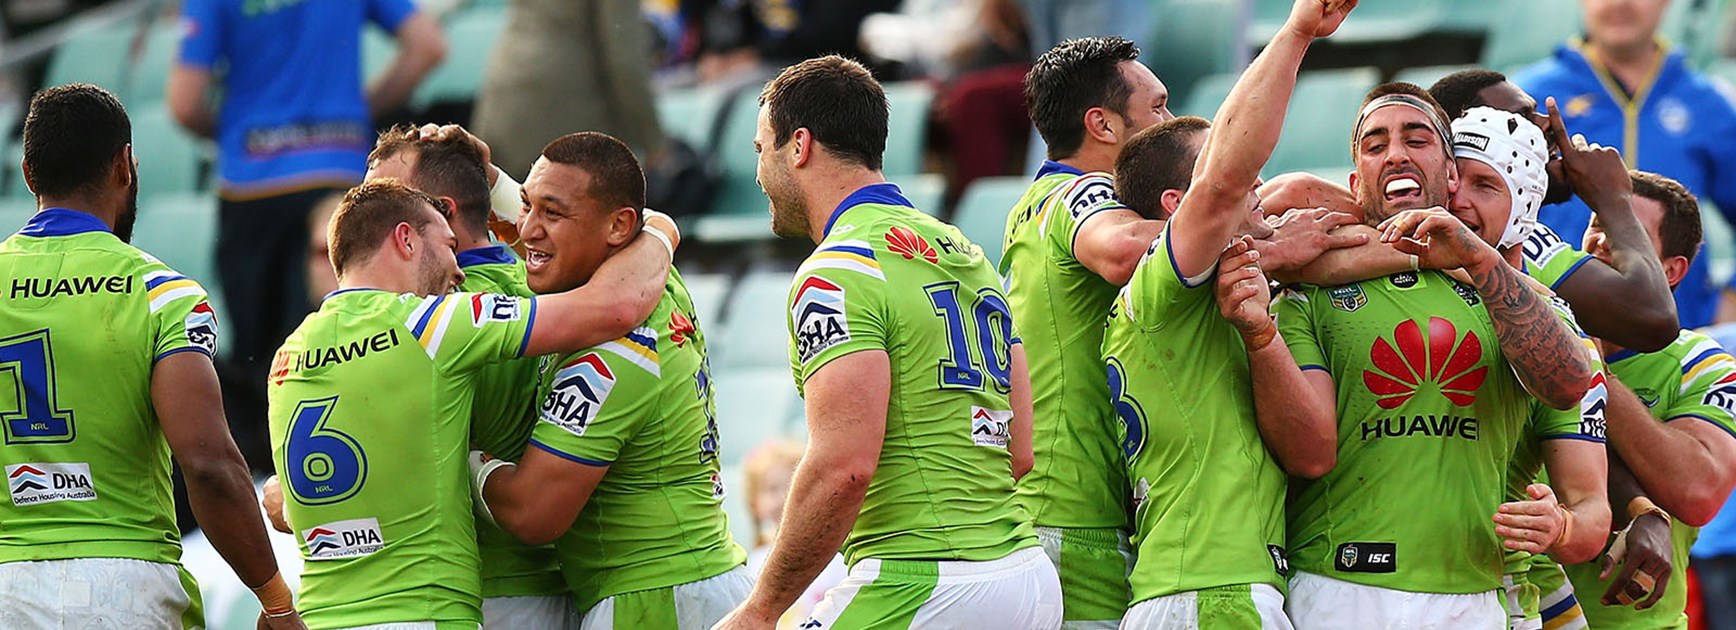 Canberra players celebrate their golden point win over the Eels in Round 26 at Pirtek Stadium.